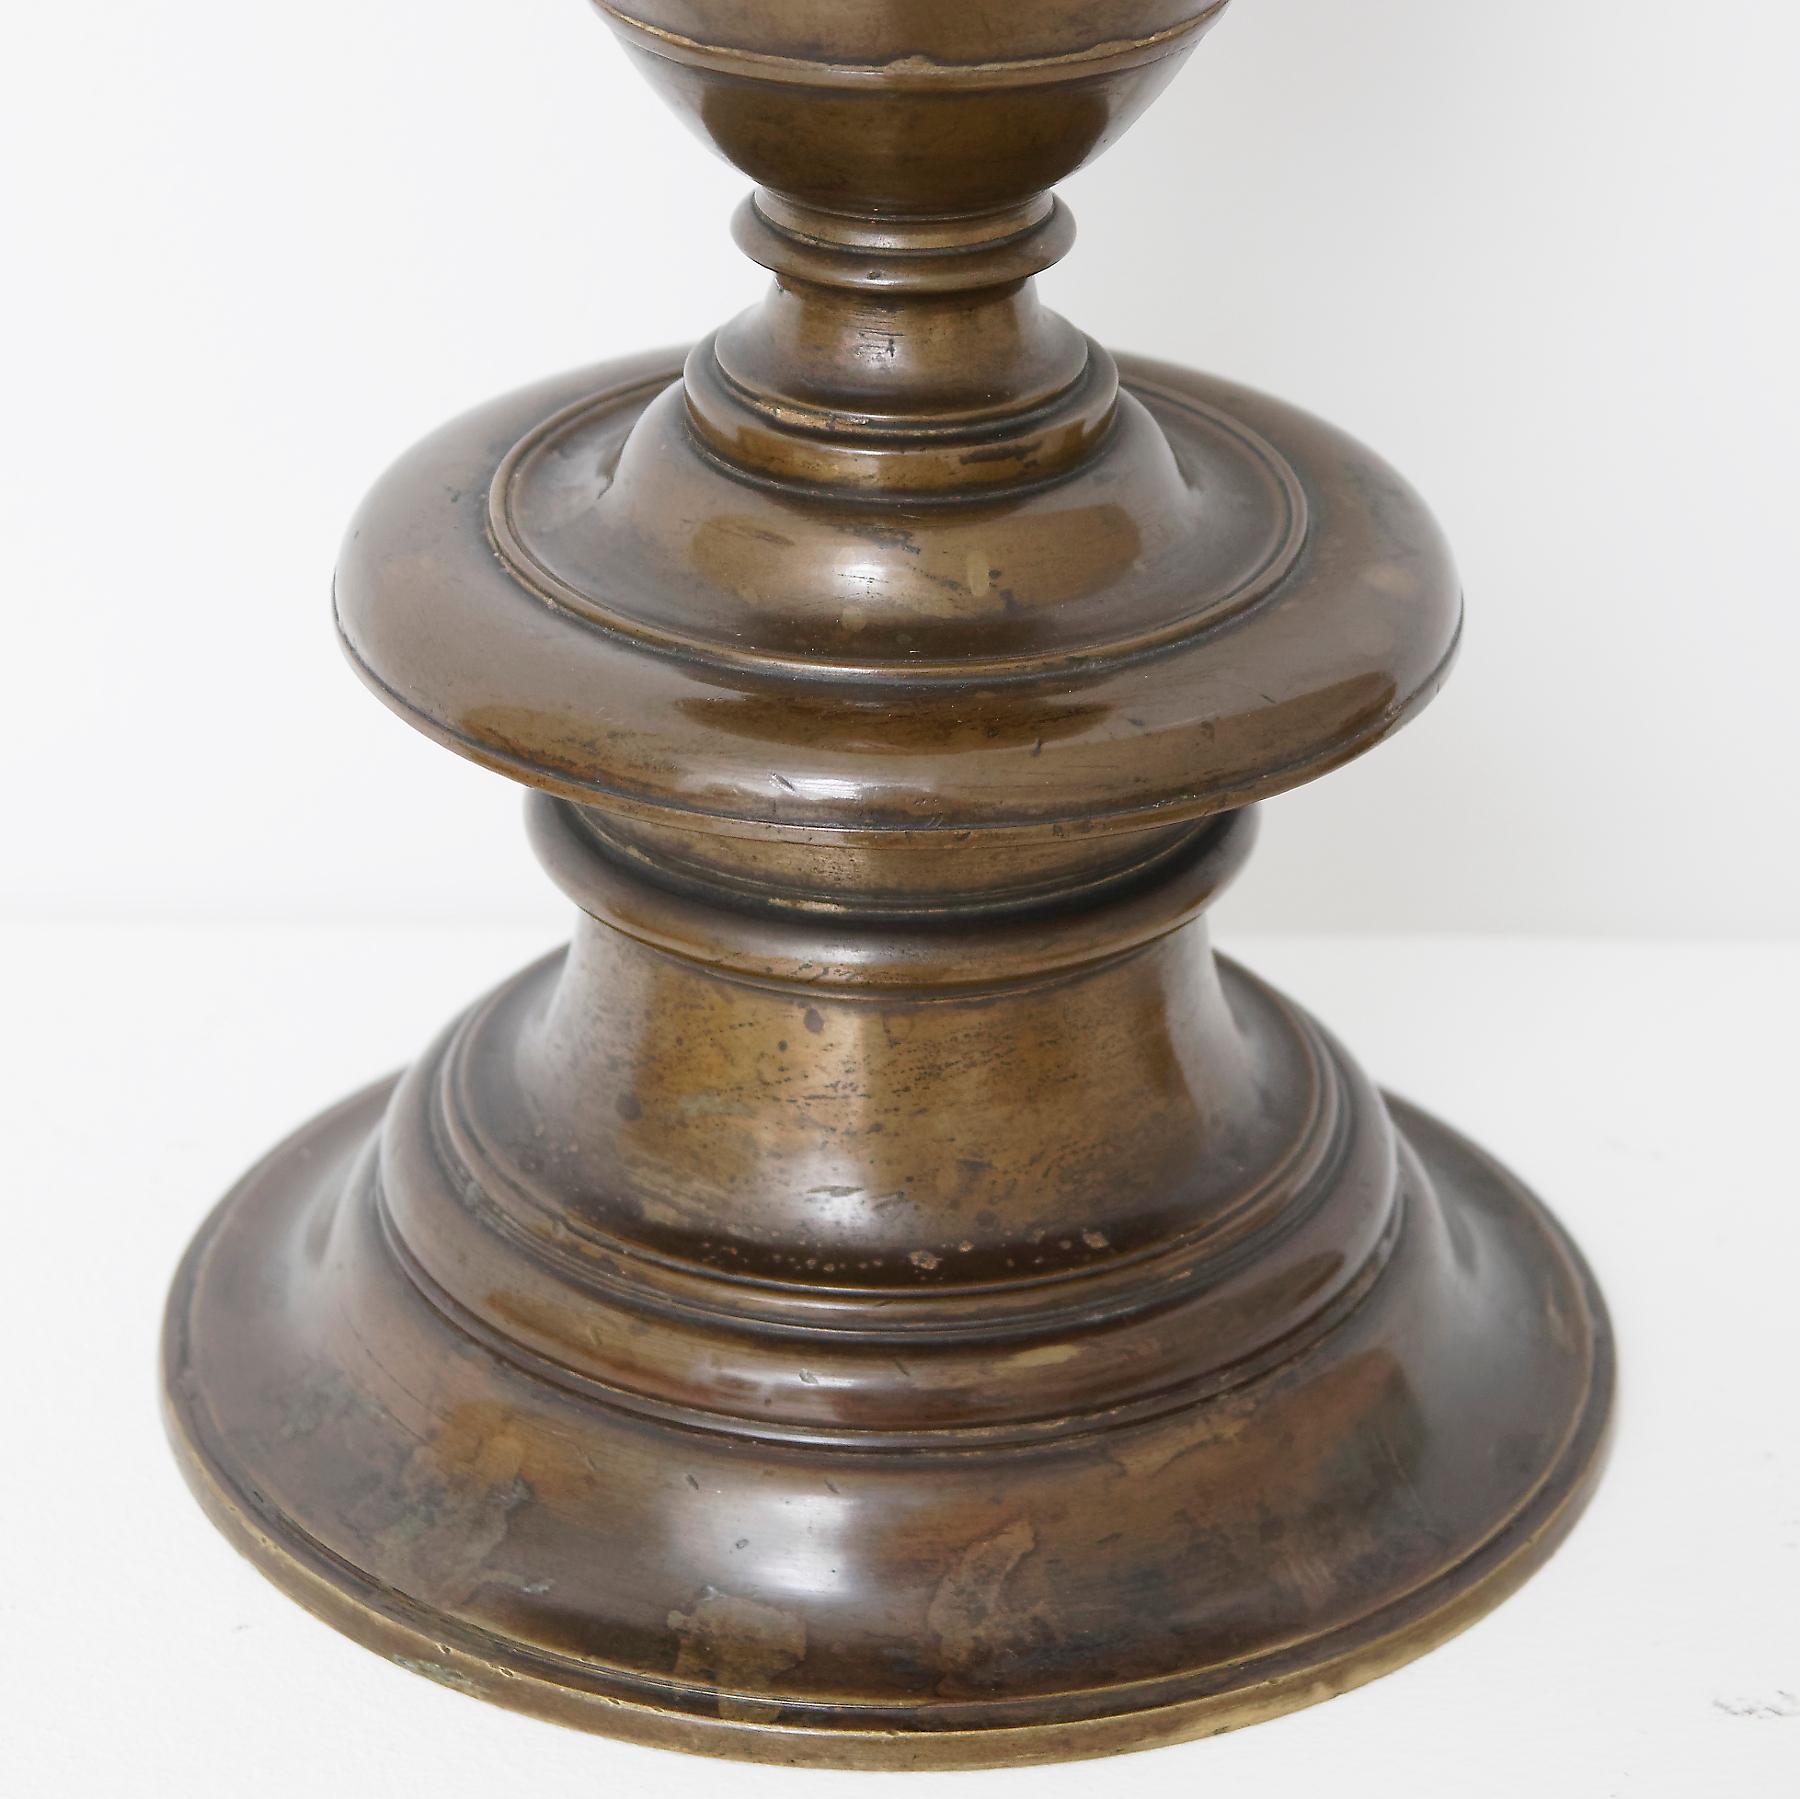 Each with inverted drip pan above a baluster-shaped stem terminating in turned circular base.

Provenance: Collection Dr. Rudolf Ergas, Florenz. Auction Hugo Helbing, München, 1931, Lot 19.